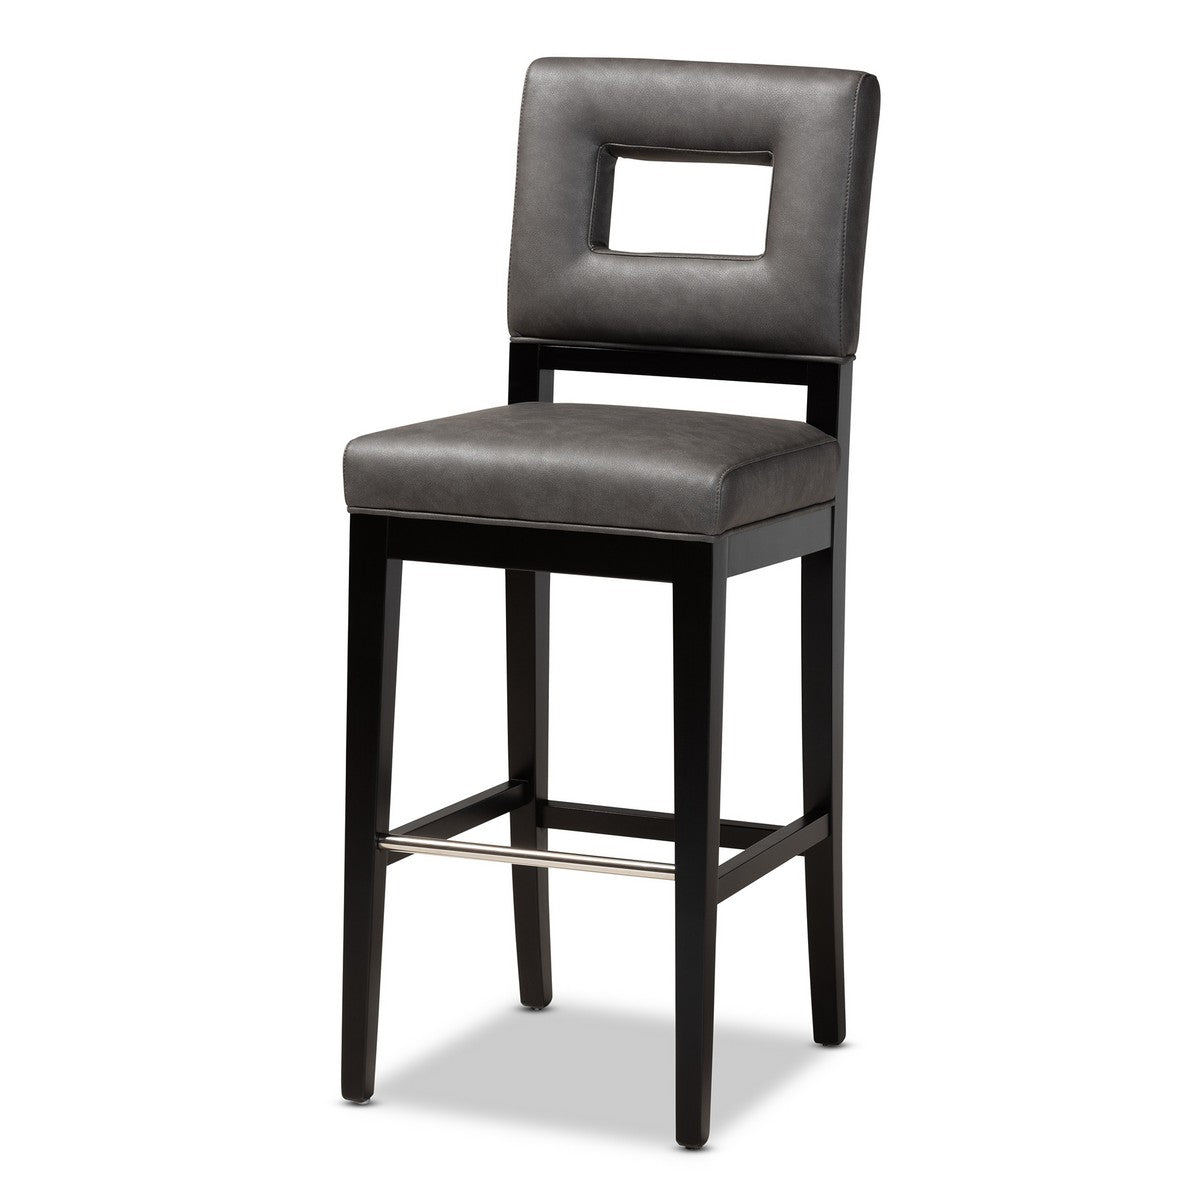 Baxton Studio Faustino Modern and Contemporary Grey Faux Leather Upholstered Black Finished Wood Bar Stool Baxton Studio- Bar Stools-Minimal And Modern - 1